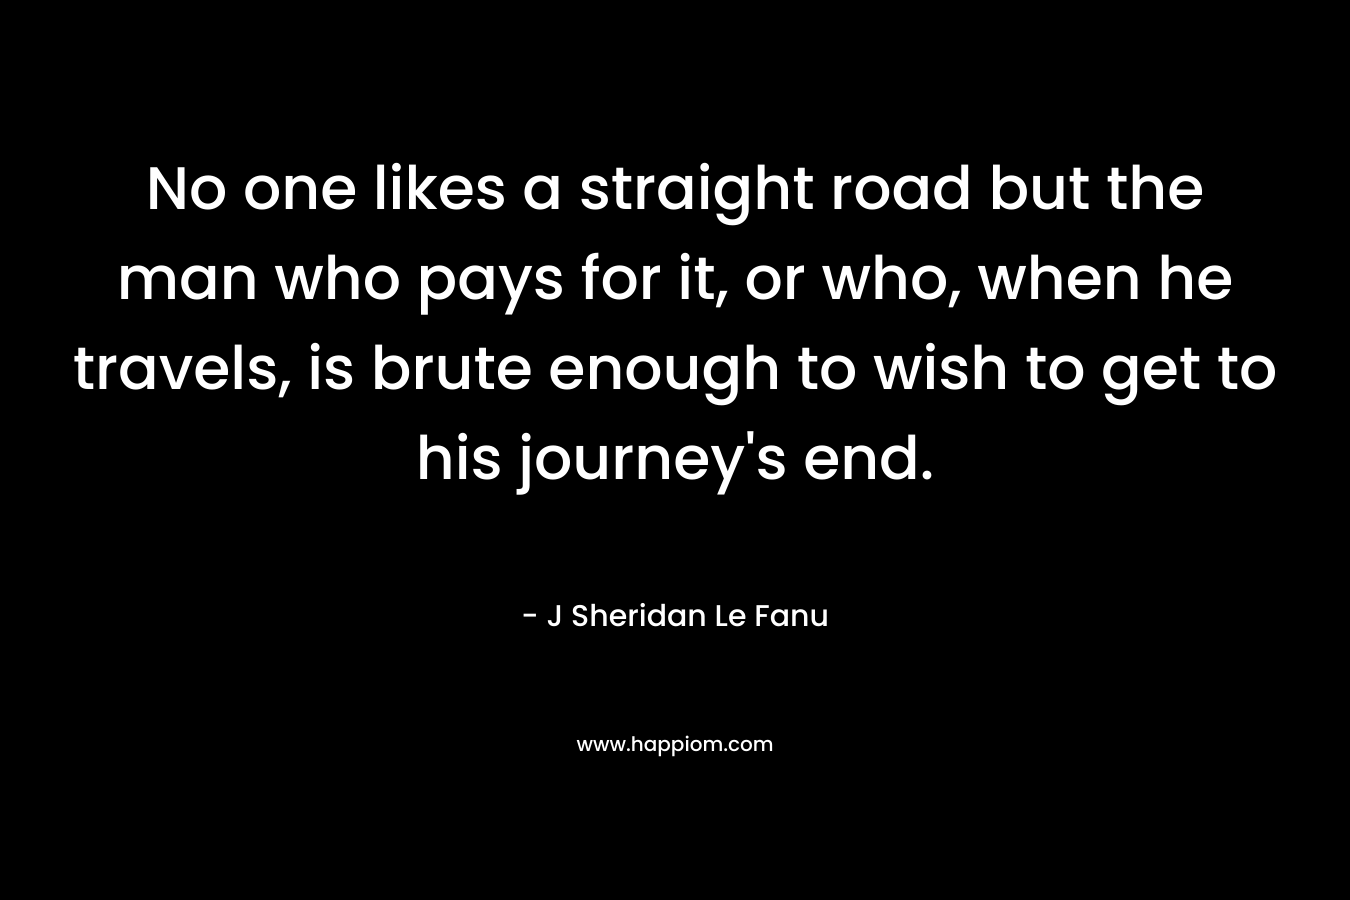 No one likes a straight road but the man who pays for it, or who, when he travels, is brute enough to wish to get to his journey's end.